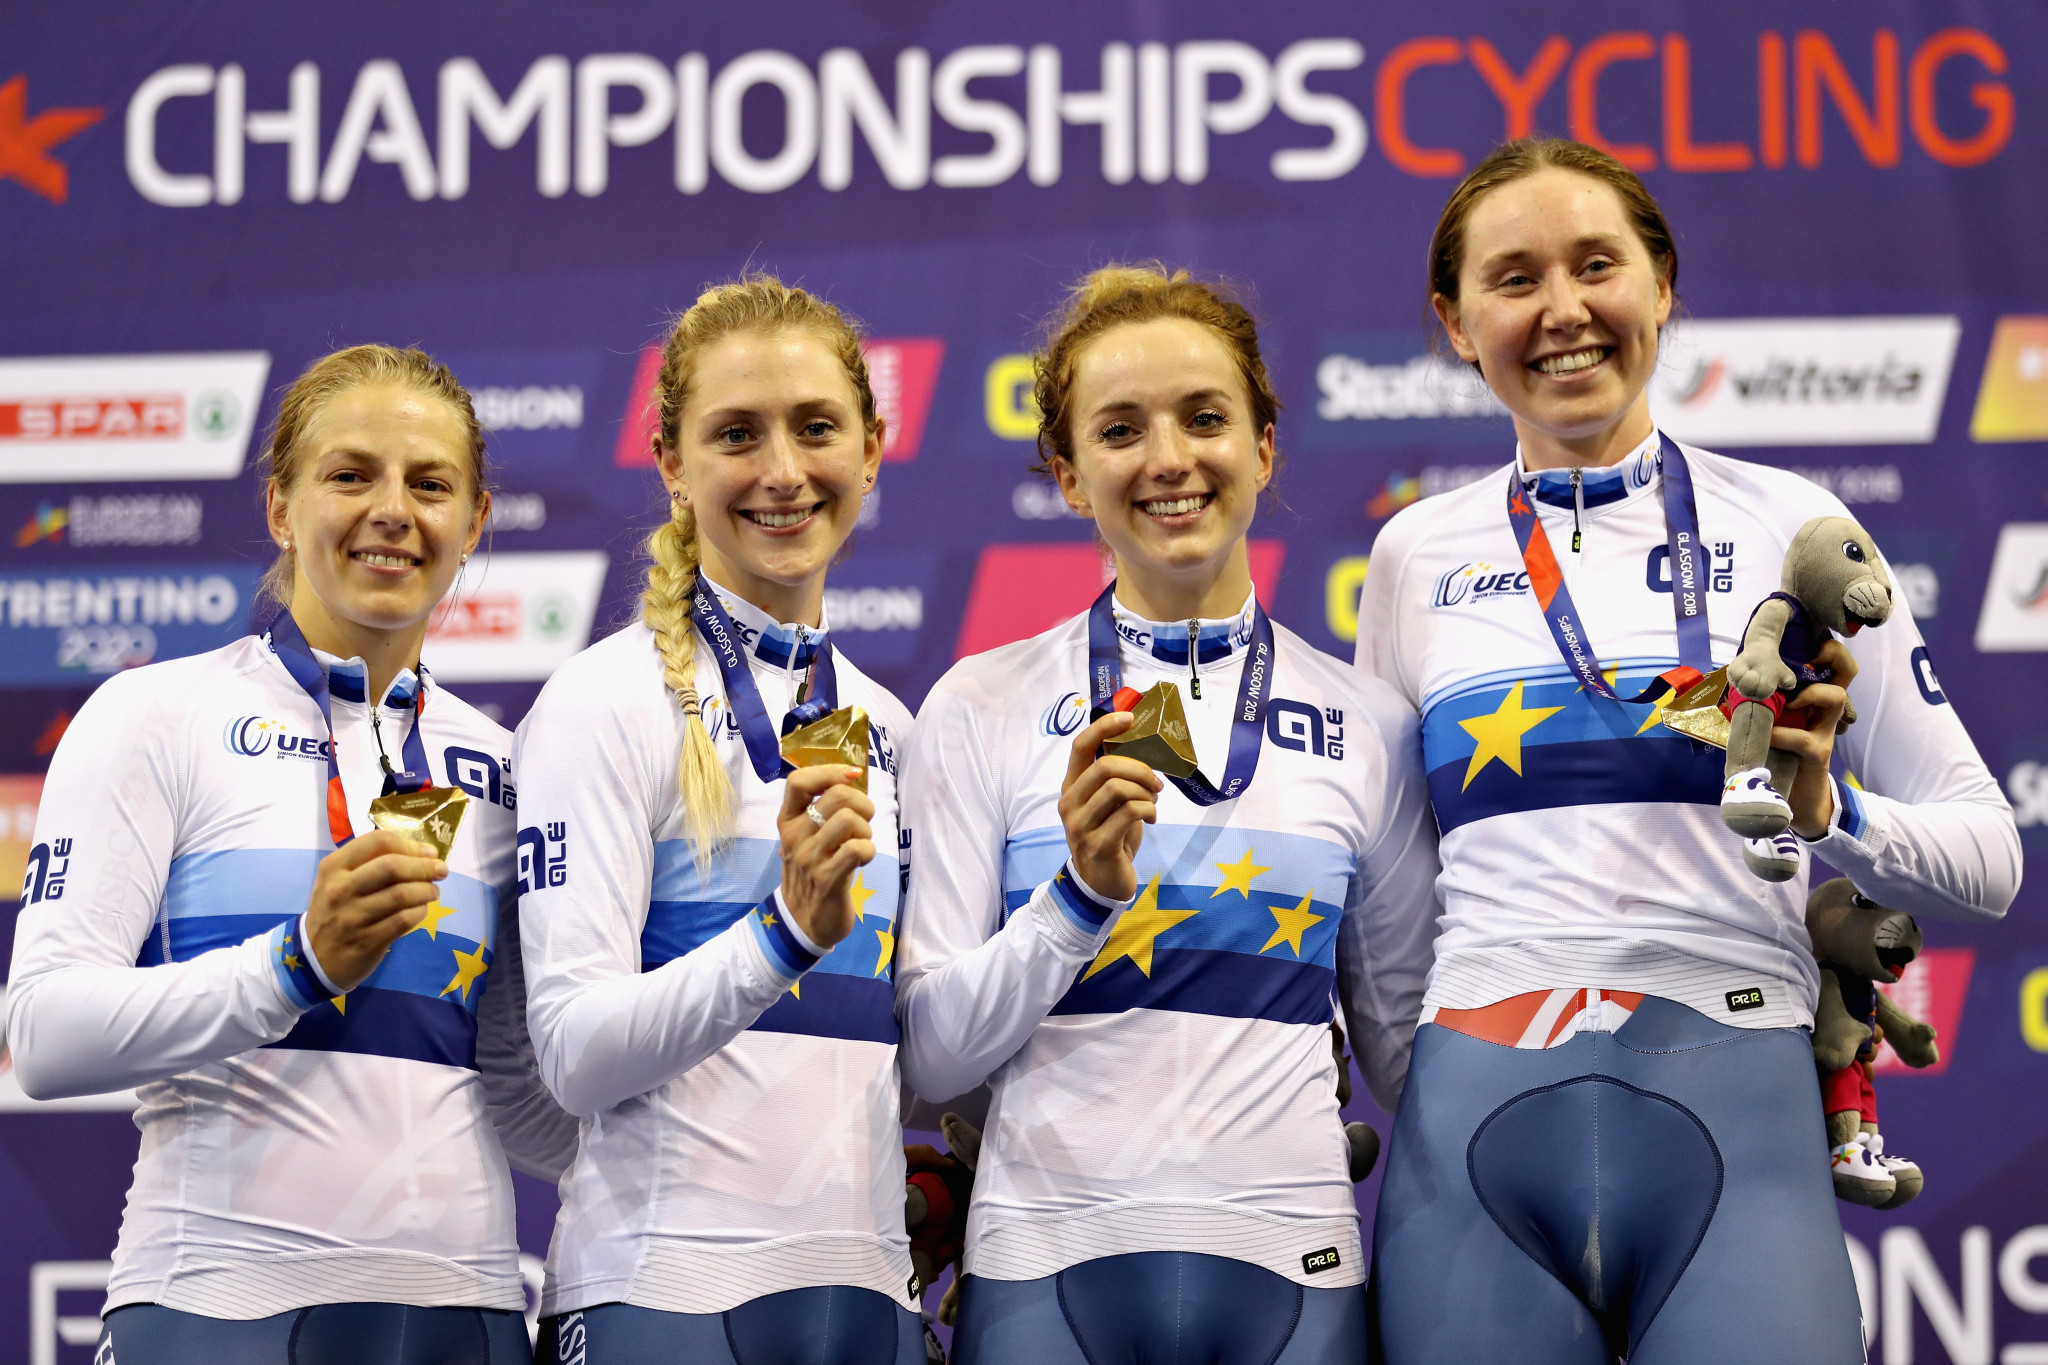 Women's team pursuit squad deliver first British gold of European Championships in Glasgow